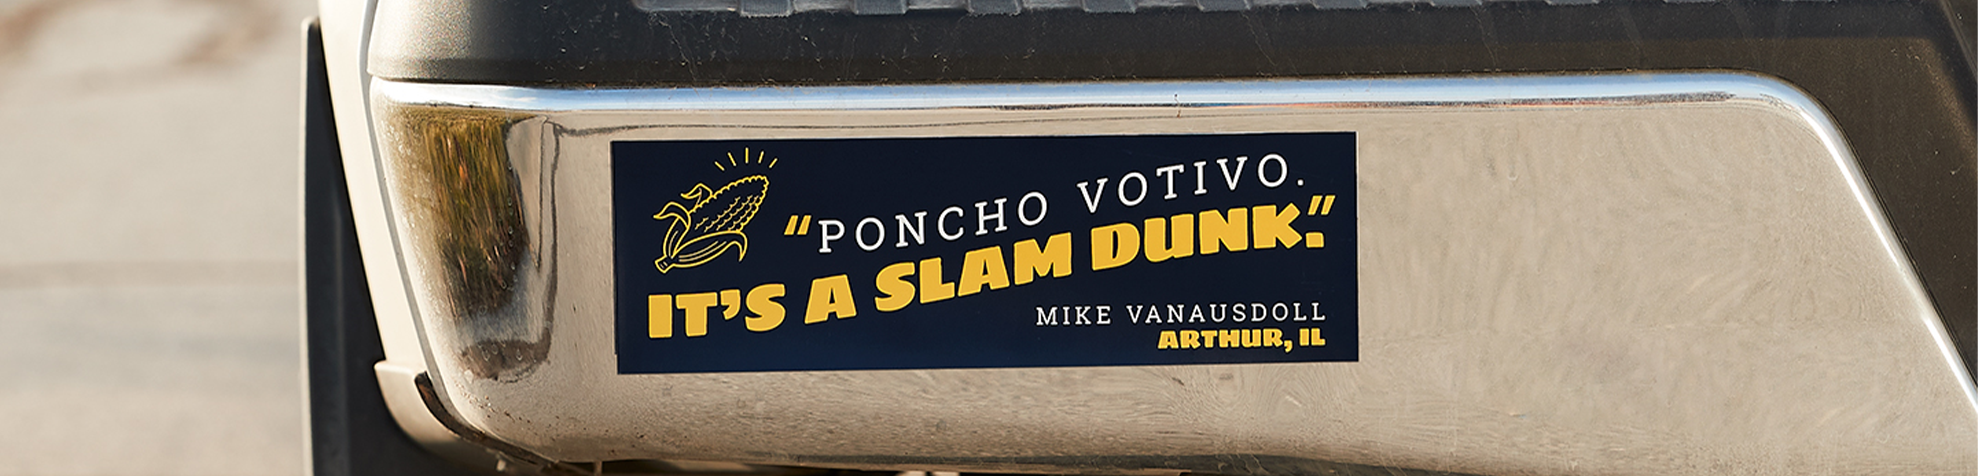 Image of a bumper sticker with the text, "Poncho Votivo. It's a slam dunk."